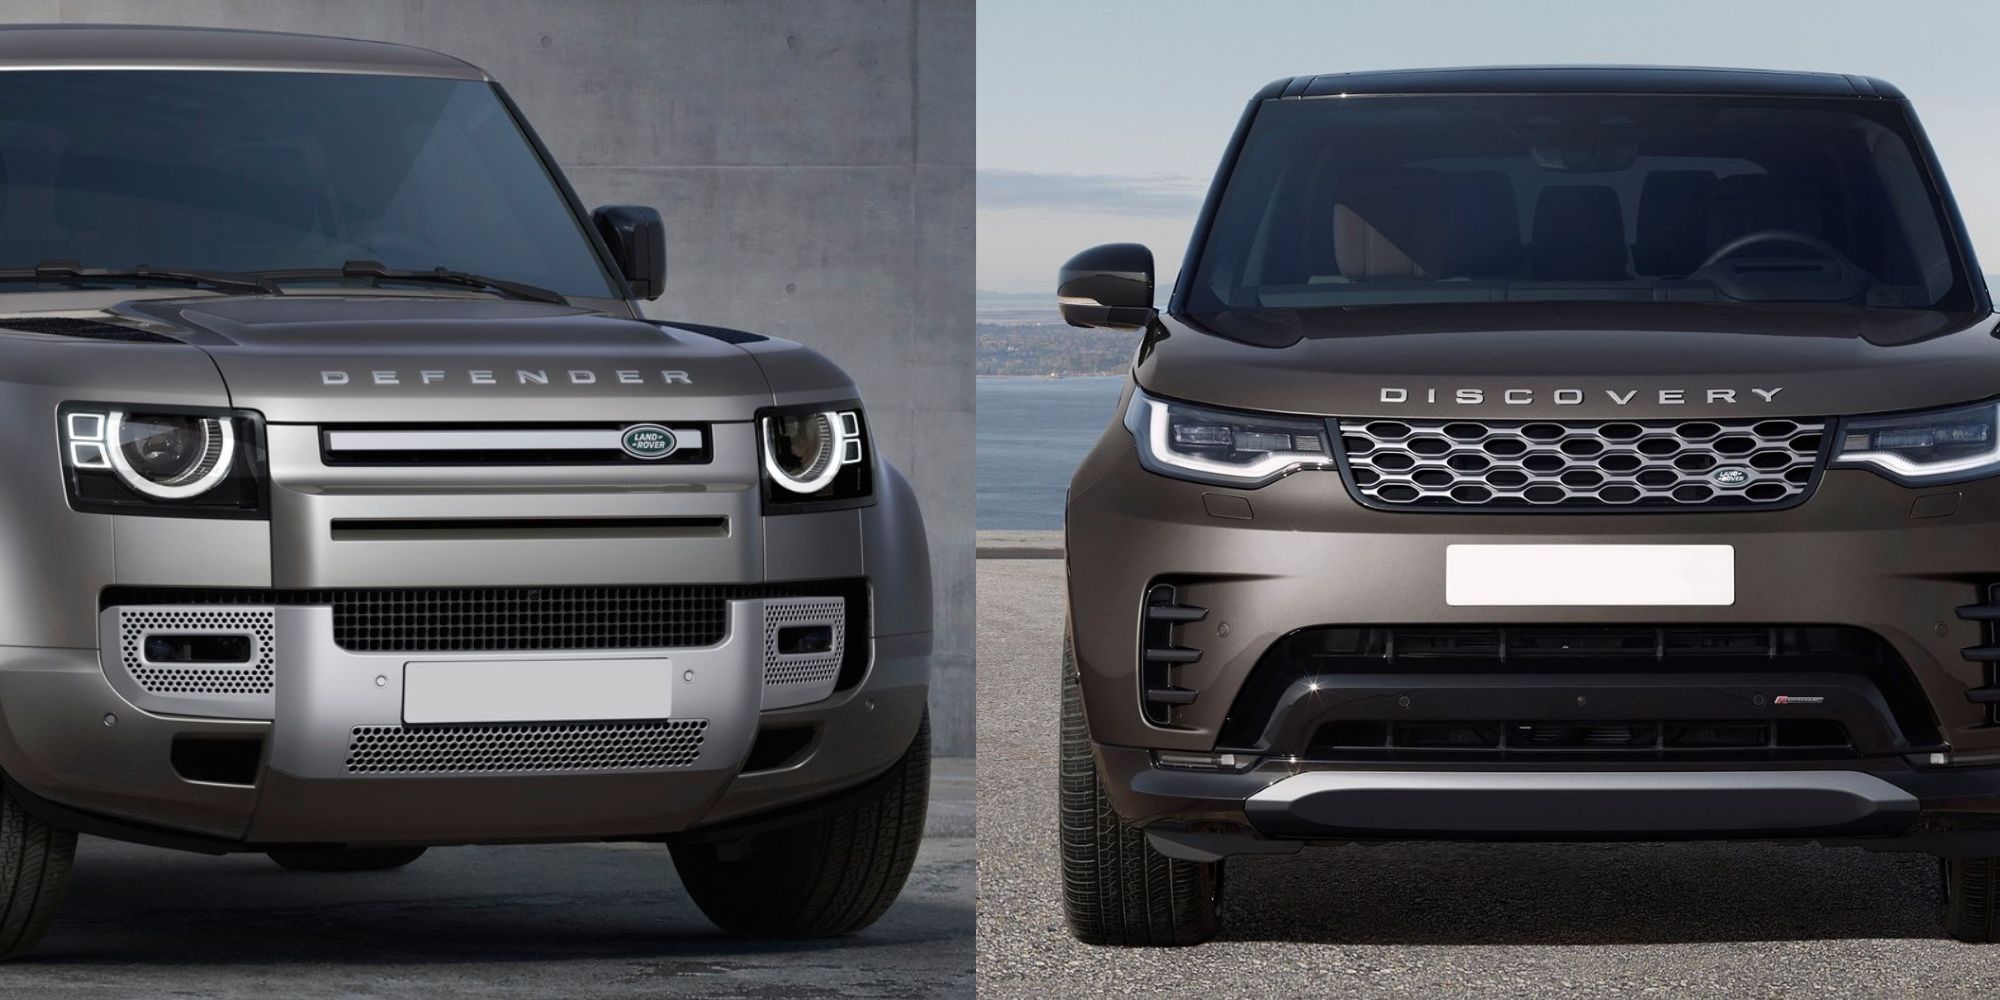 Defender and Discovery Comparison